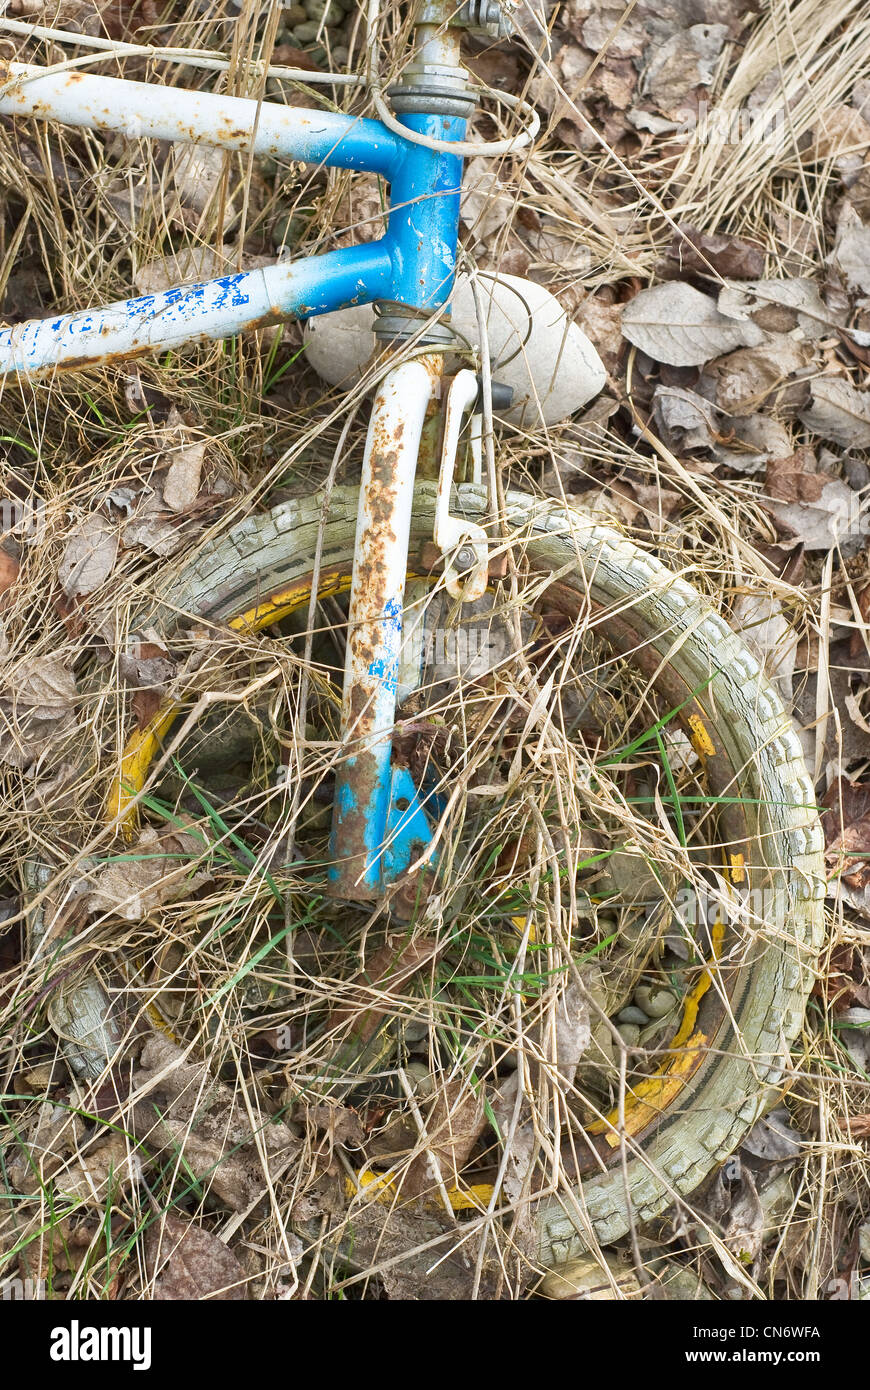 Old and Abandoned Bike as Everyday Environmental Pollution Stock Photo